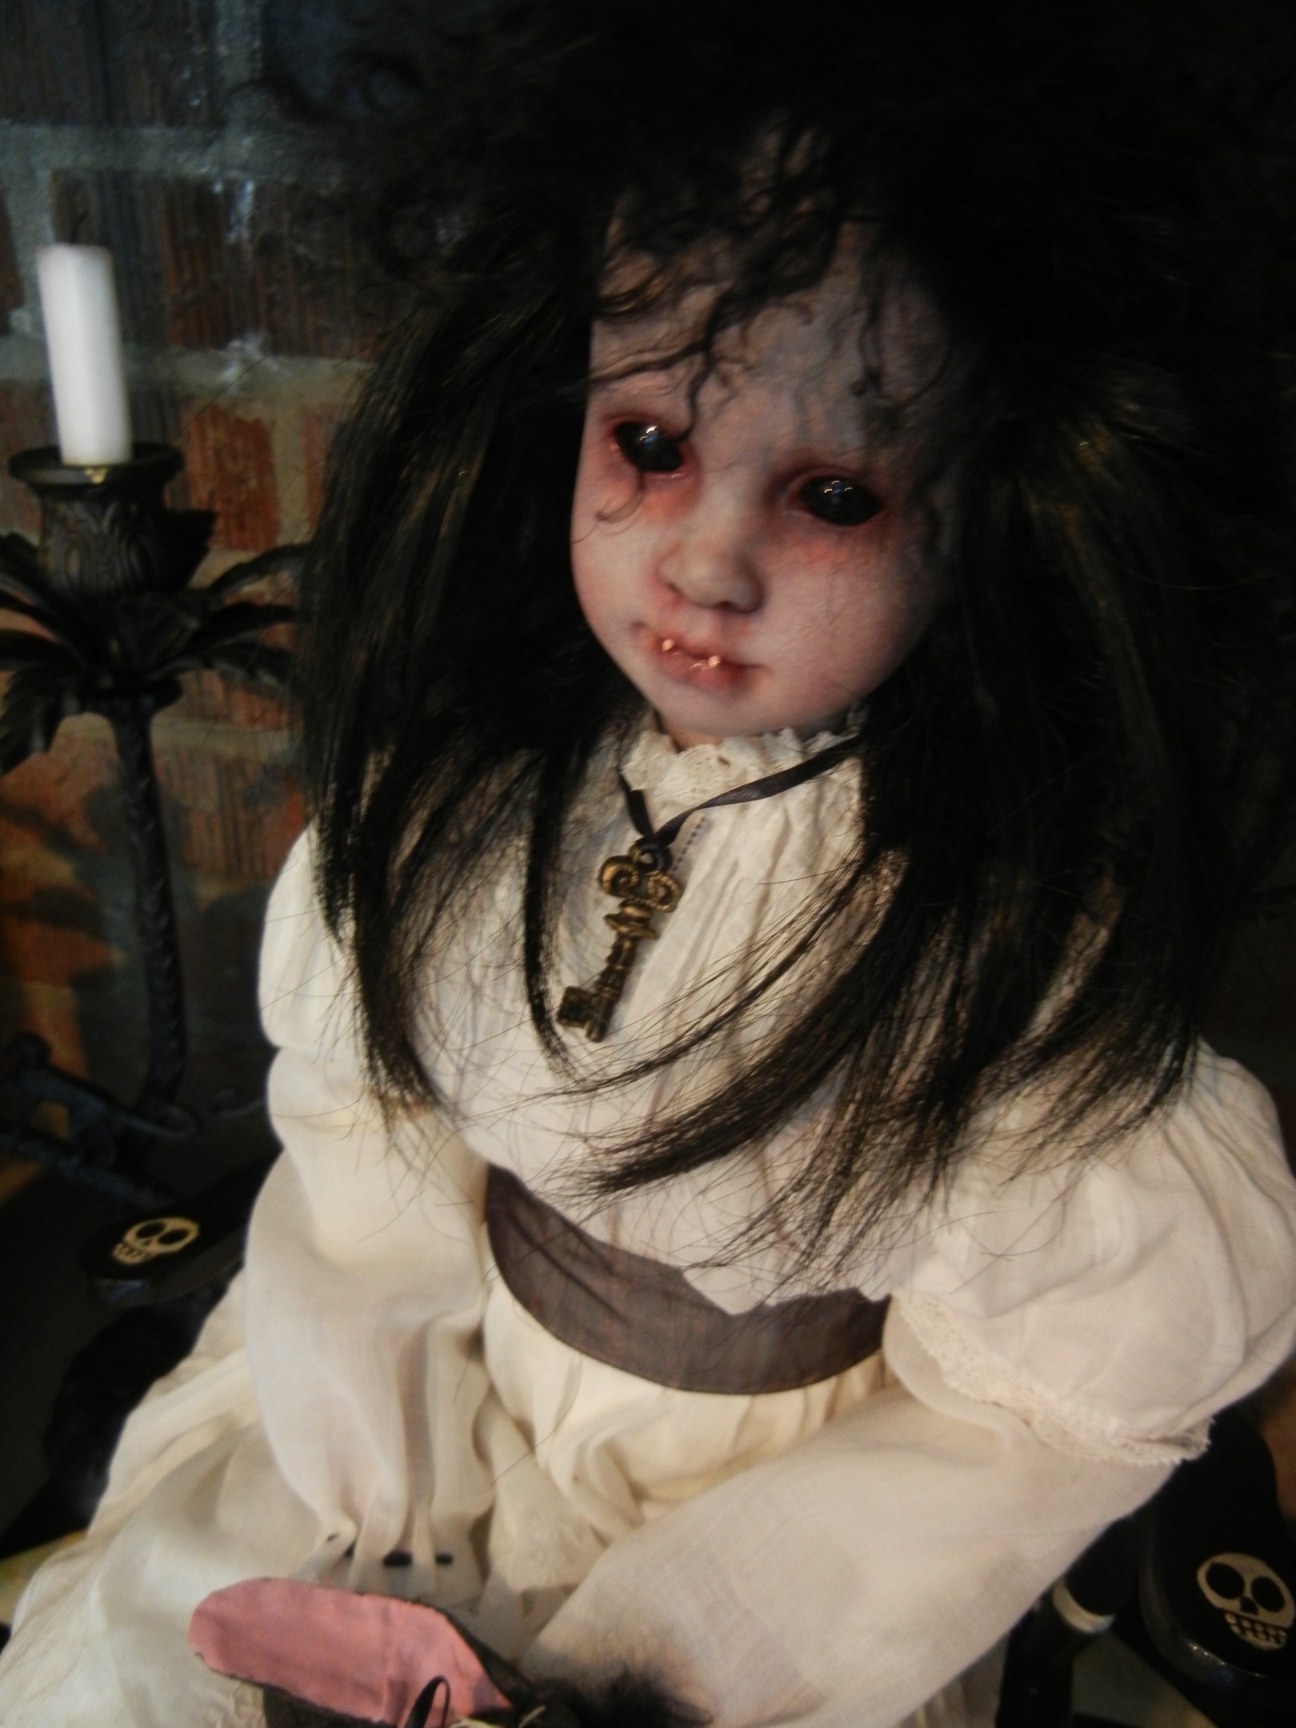 seated gothic artdoll pale porcelain repaint with black hair wearing white victorian blouse and bloomers, key necklace